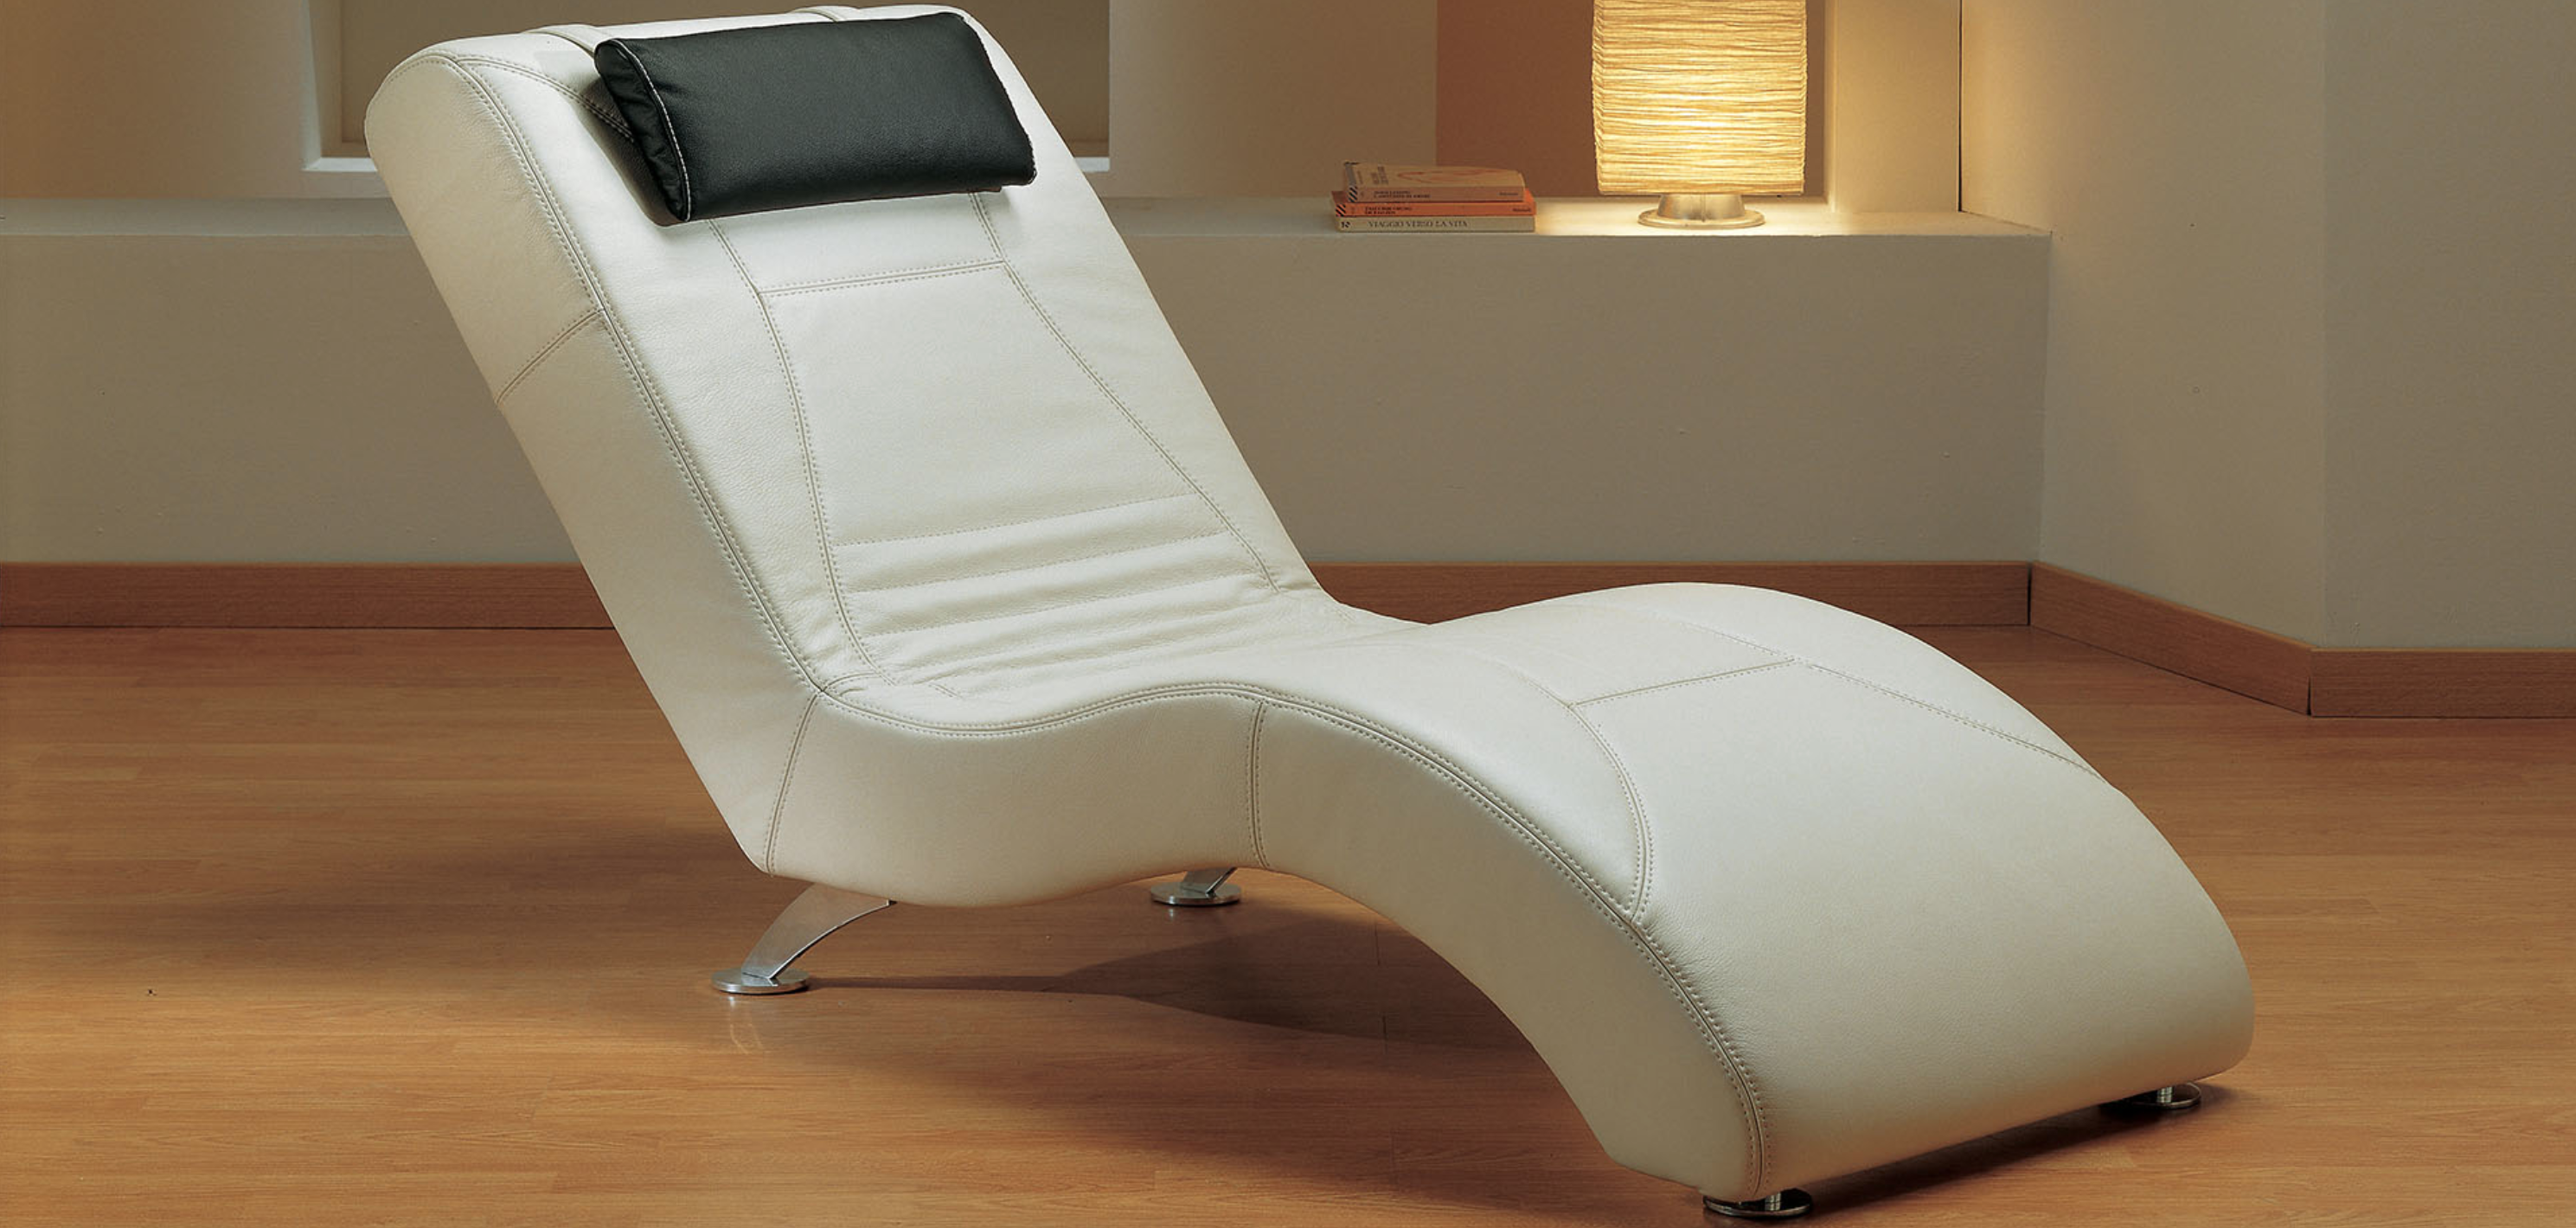 WAVE Italian Crafted Chaise Chair in White Italian Leather. RRP £1399